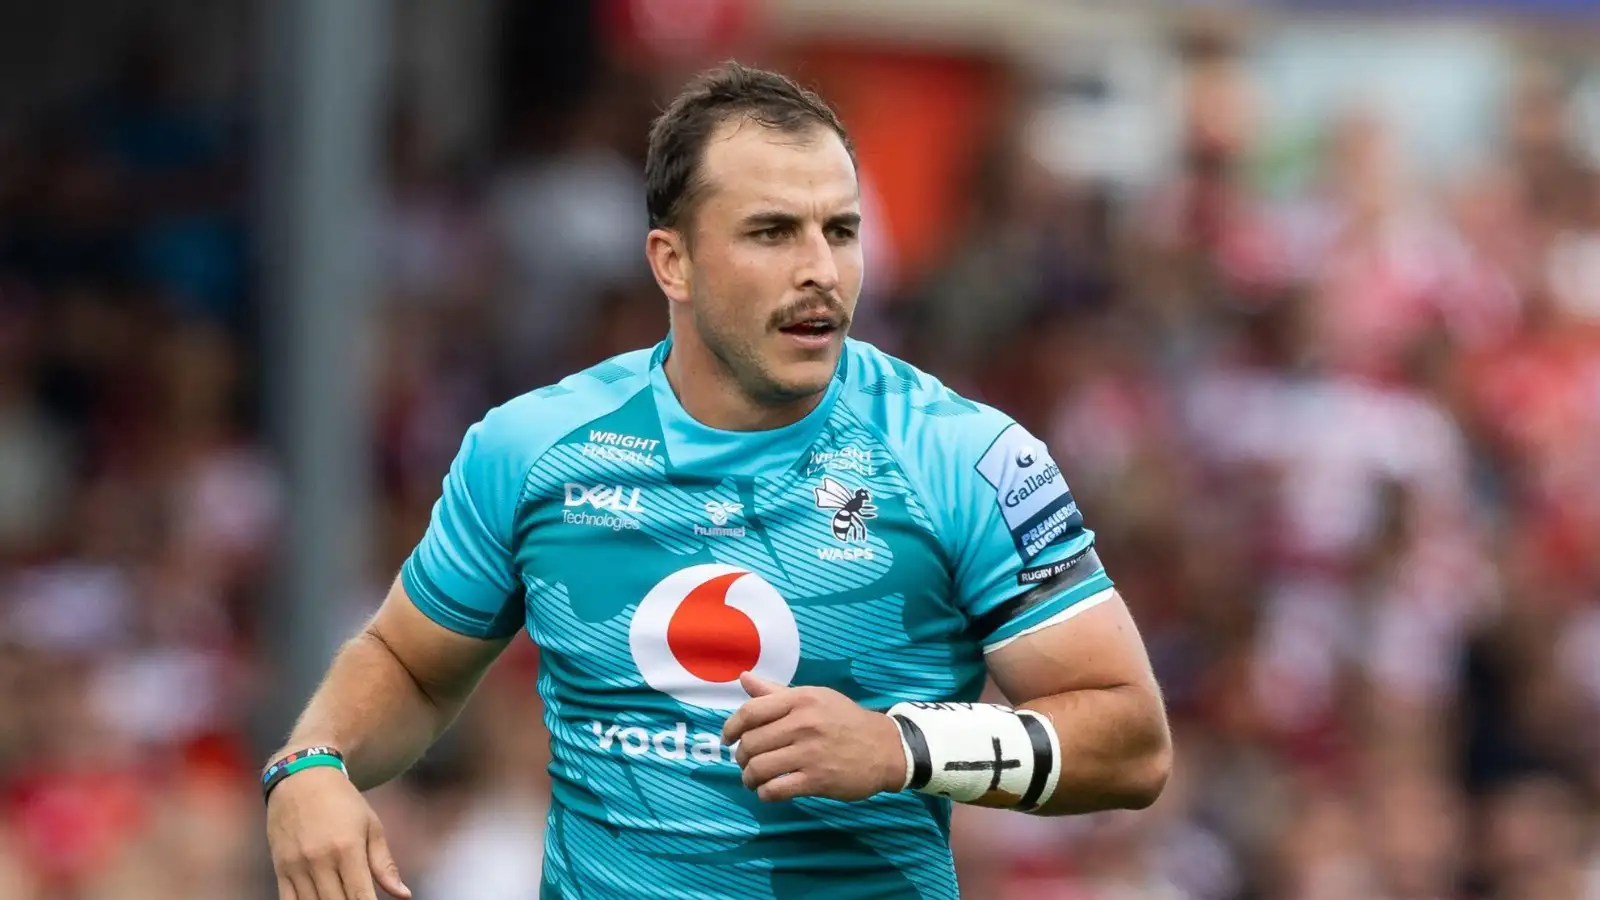 Northampton Saints have confirmed the signing of South African centre Burger Odendaal ahead of the 2023/24 Premiership season.  It will be Odendaal’s second stint in the Premiership after he joined Wasps from the Lions at the start of the 2022/23 season.